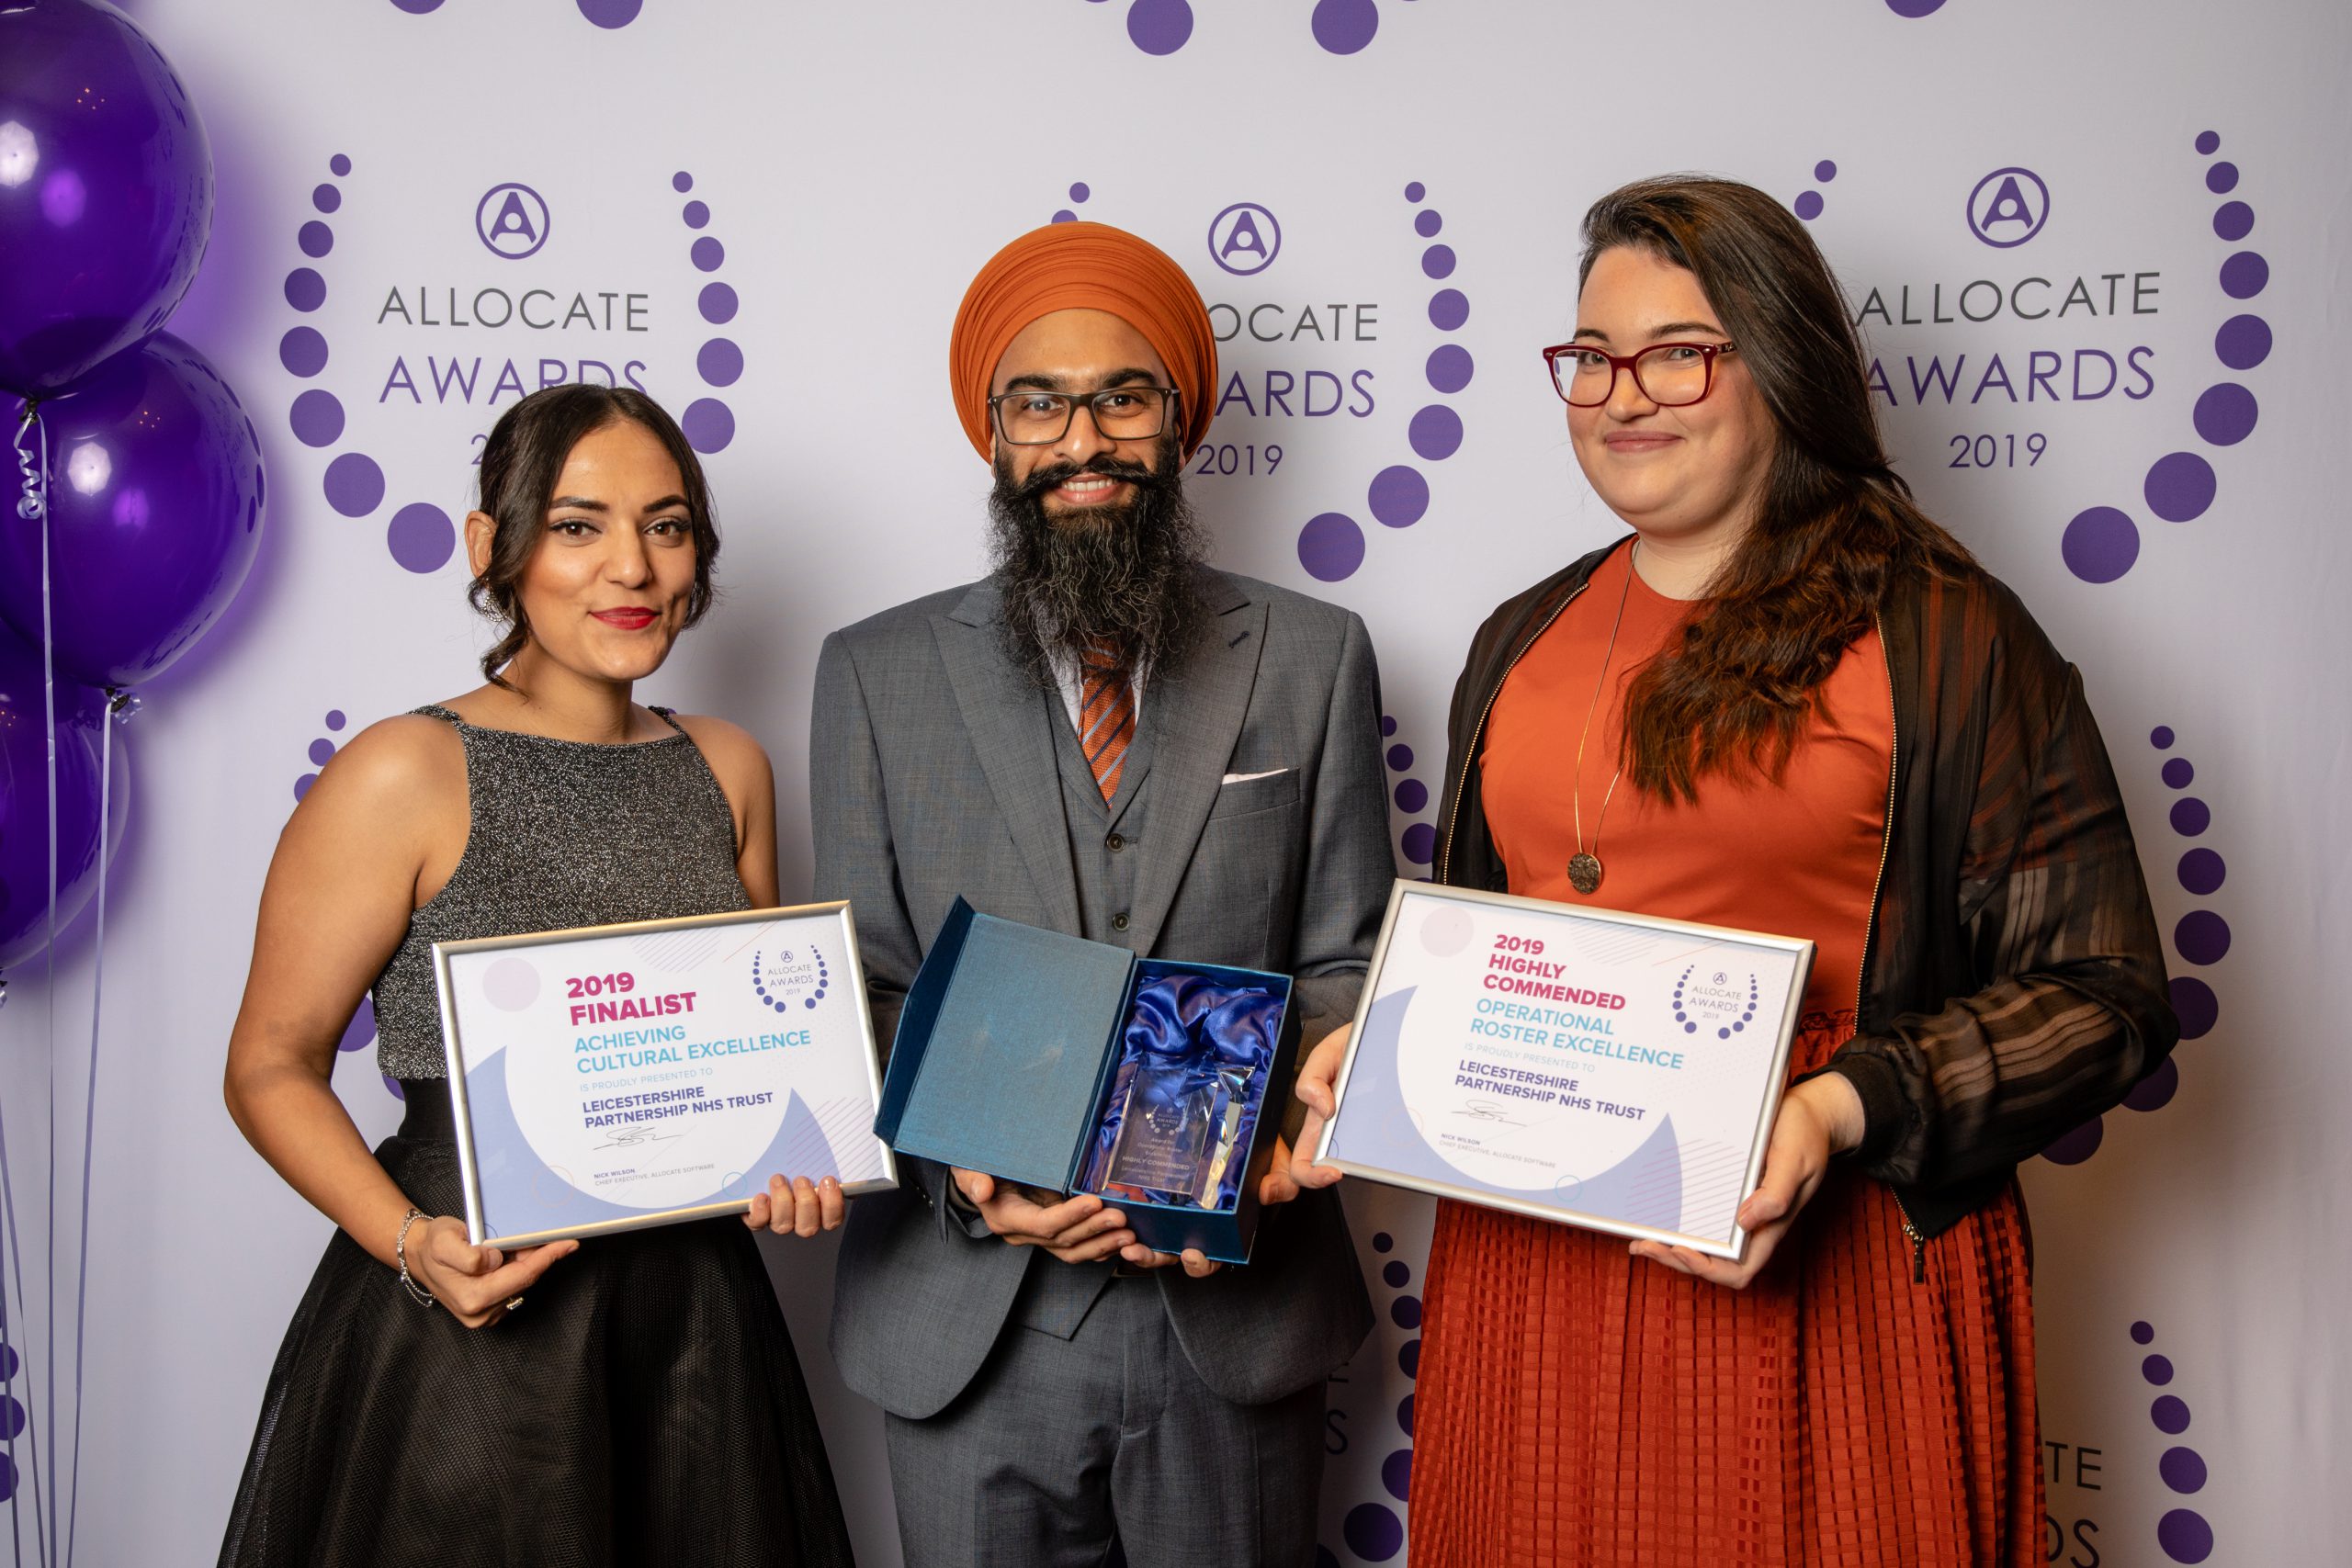 Allocate Awards 2017  – a night to celebrate success and real achievement